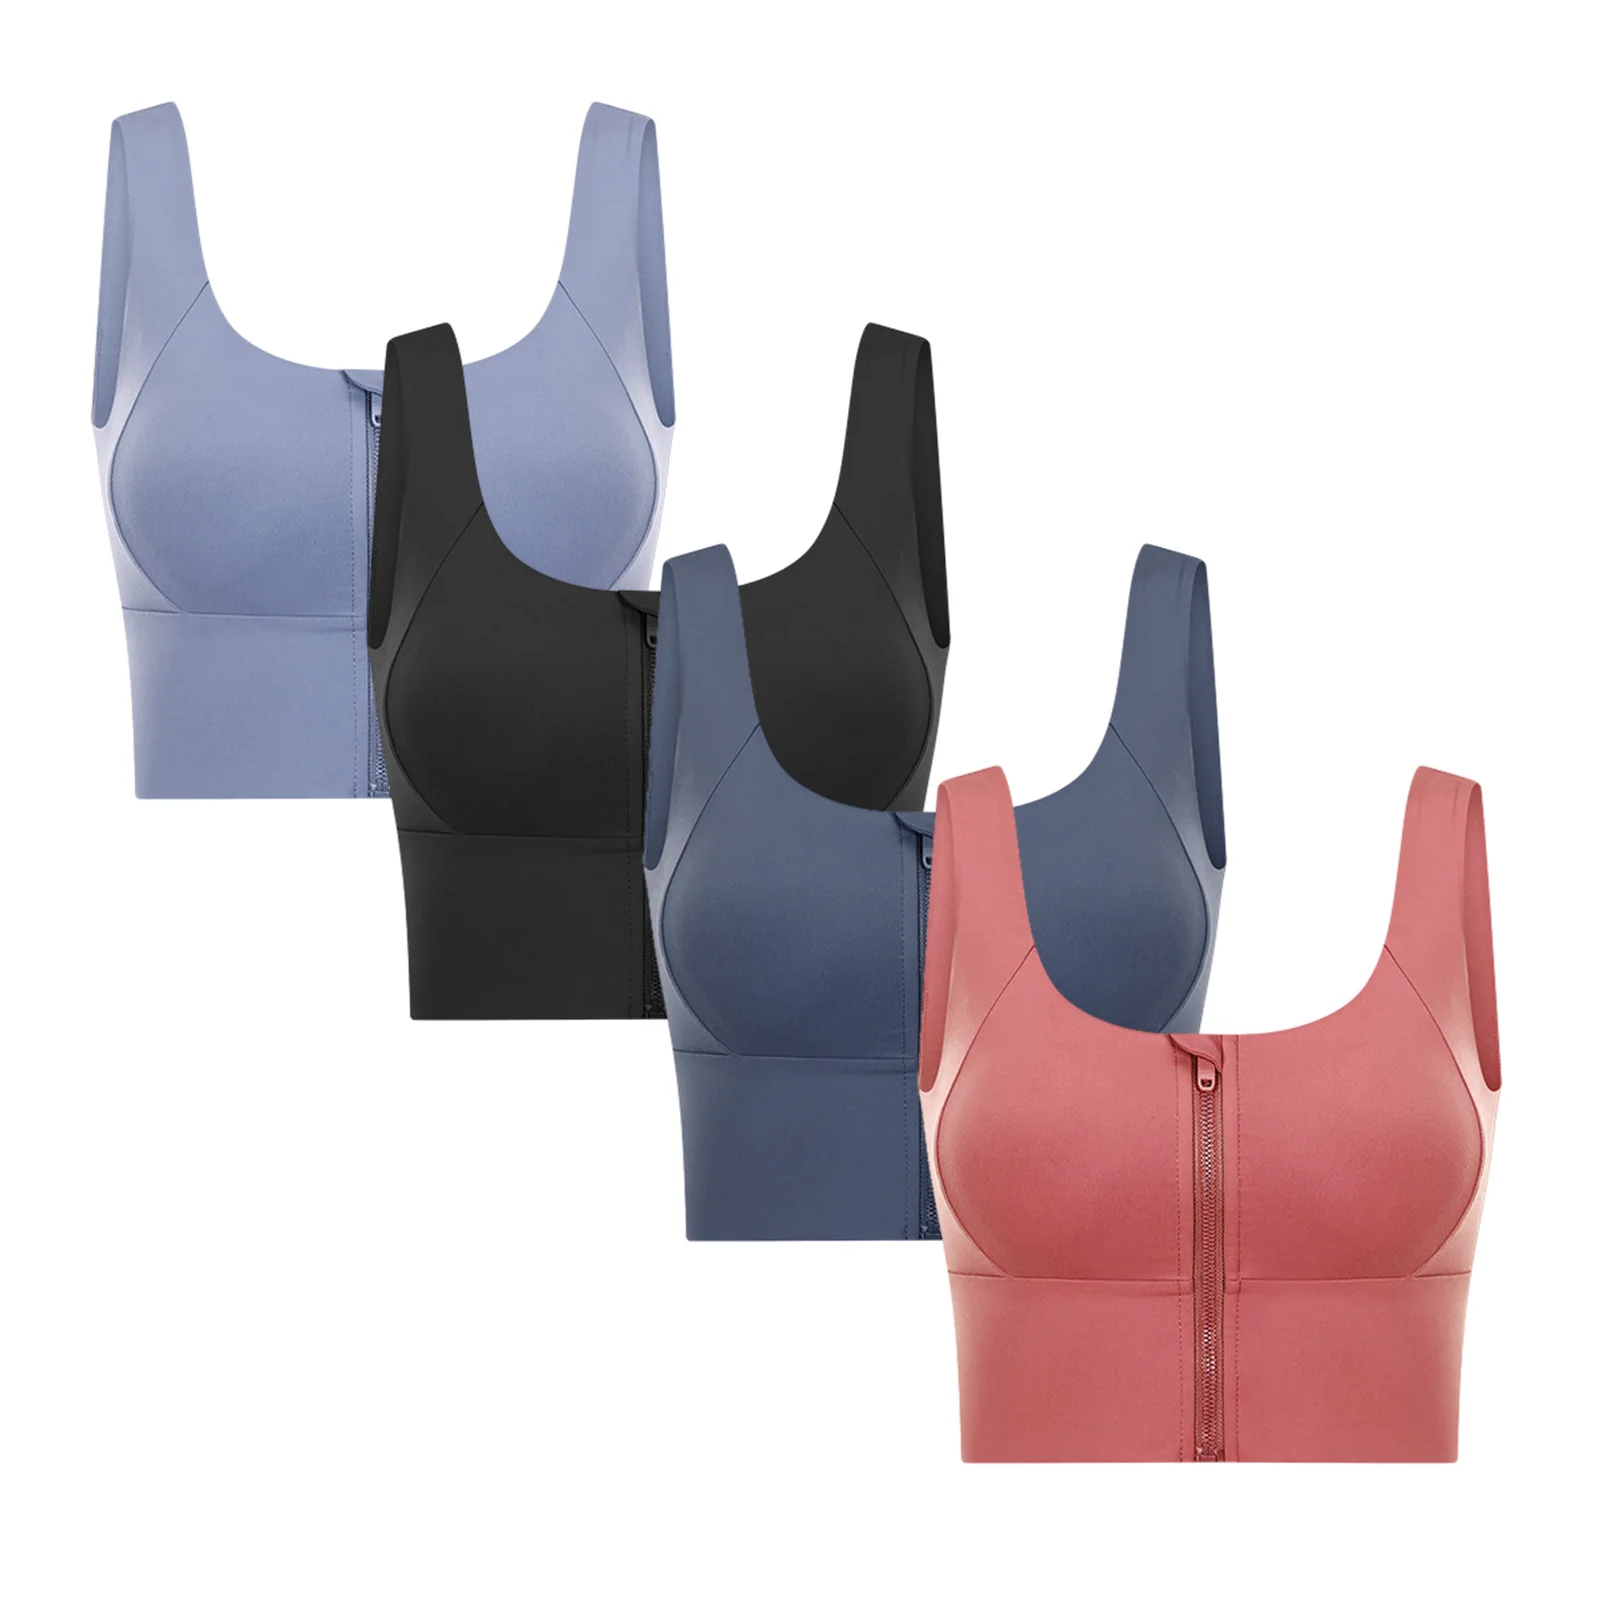 High Support Zip Front Sports Bra front zipper yoga bra ladies padded sports bra supportive Top Nylon Spandex Breathable